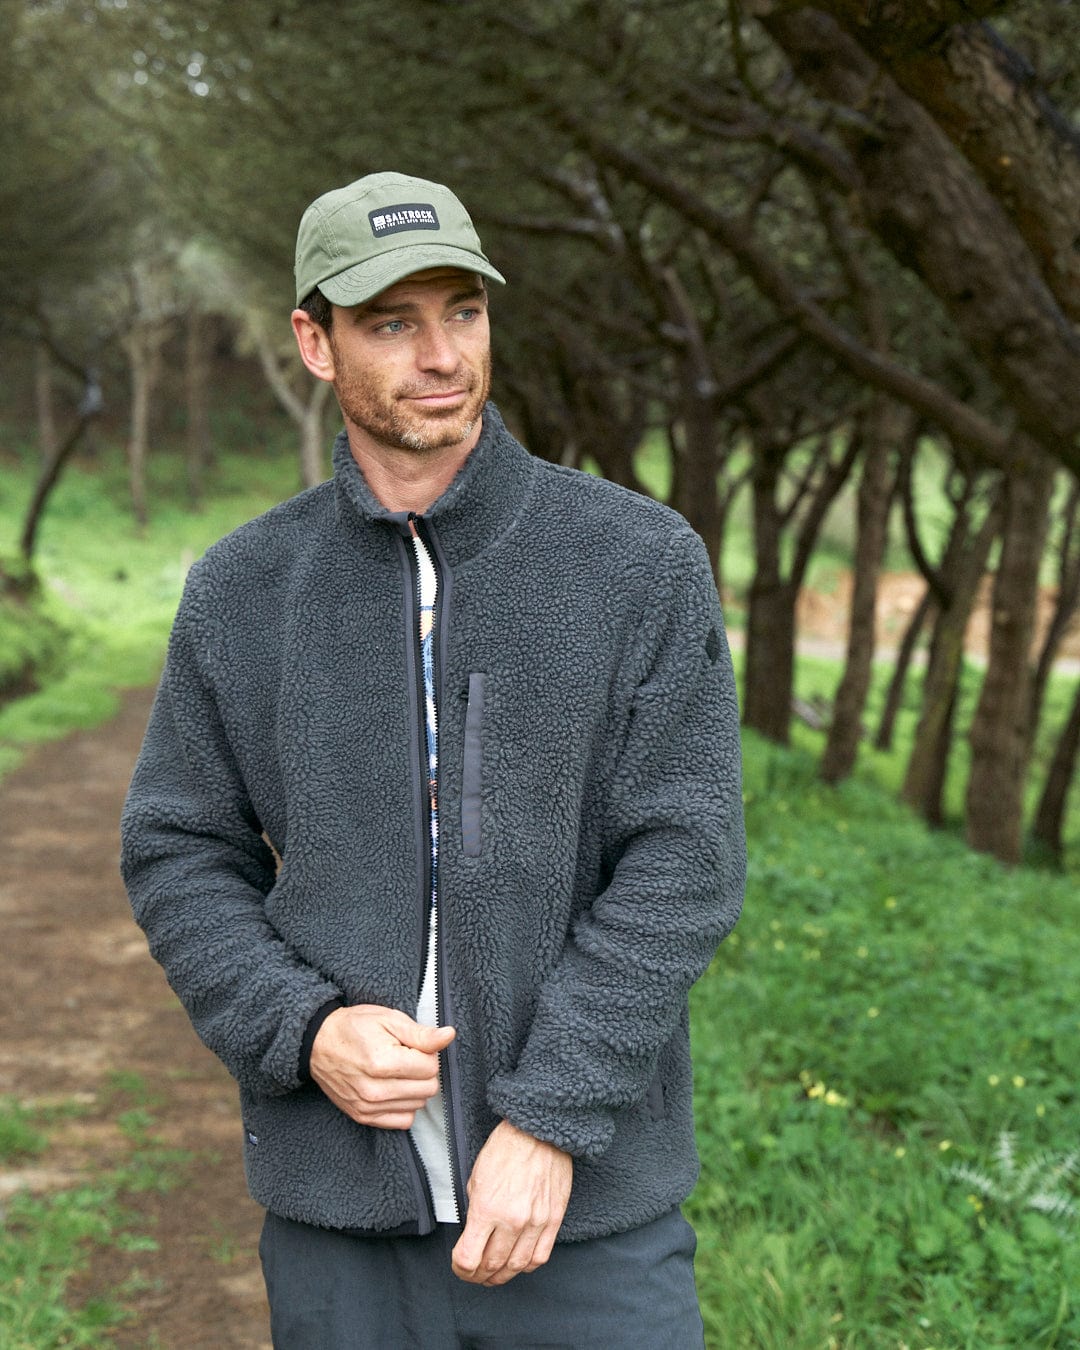 A man wearing a Saltrock hat and jacket with Saltrock branding standing on a path.